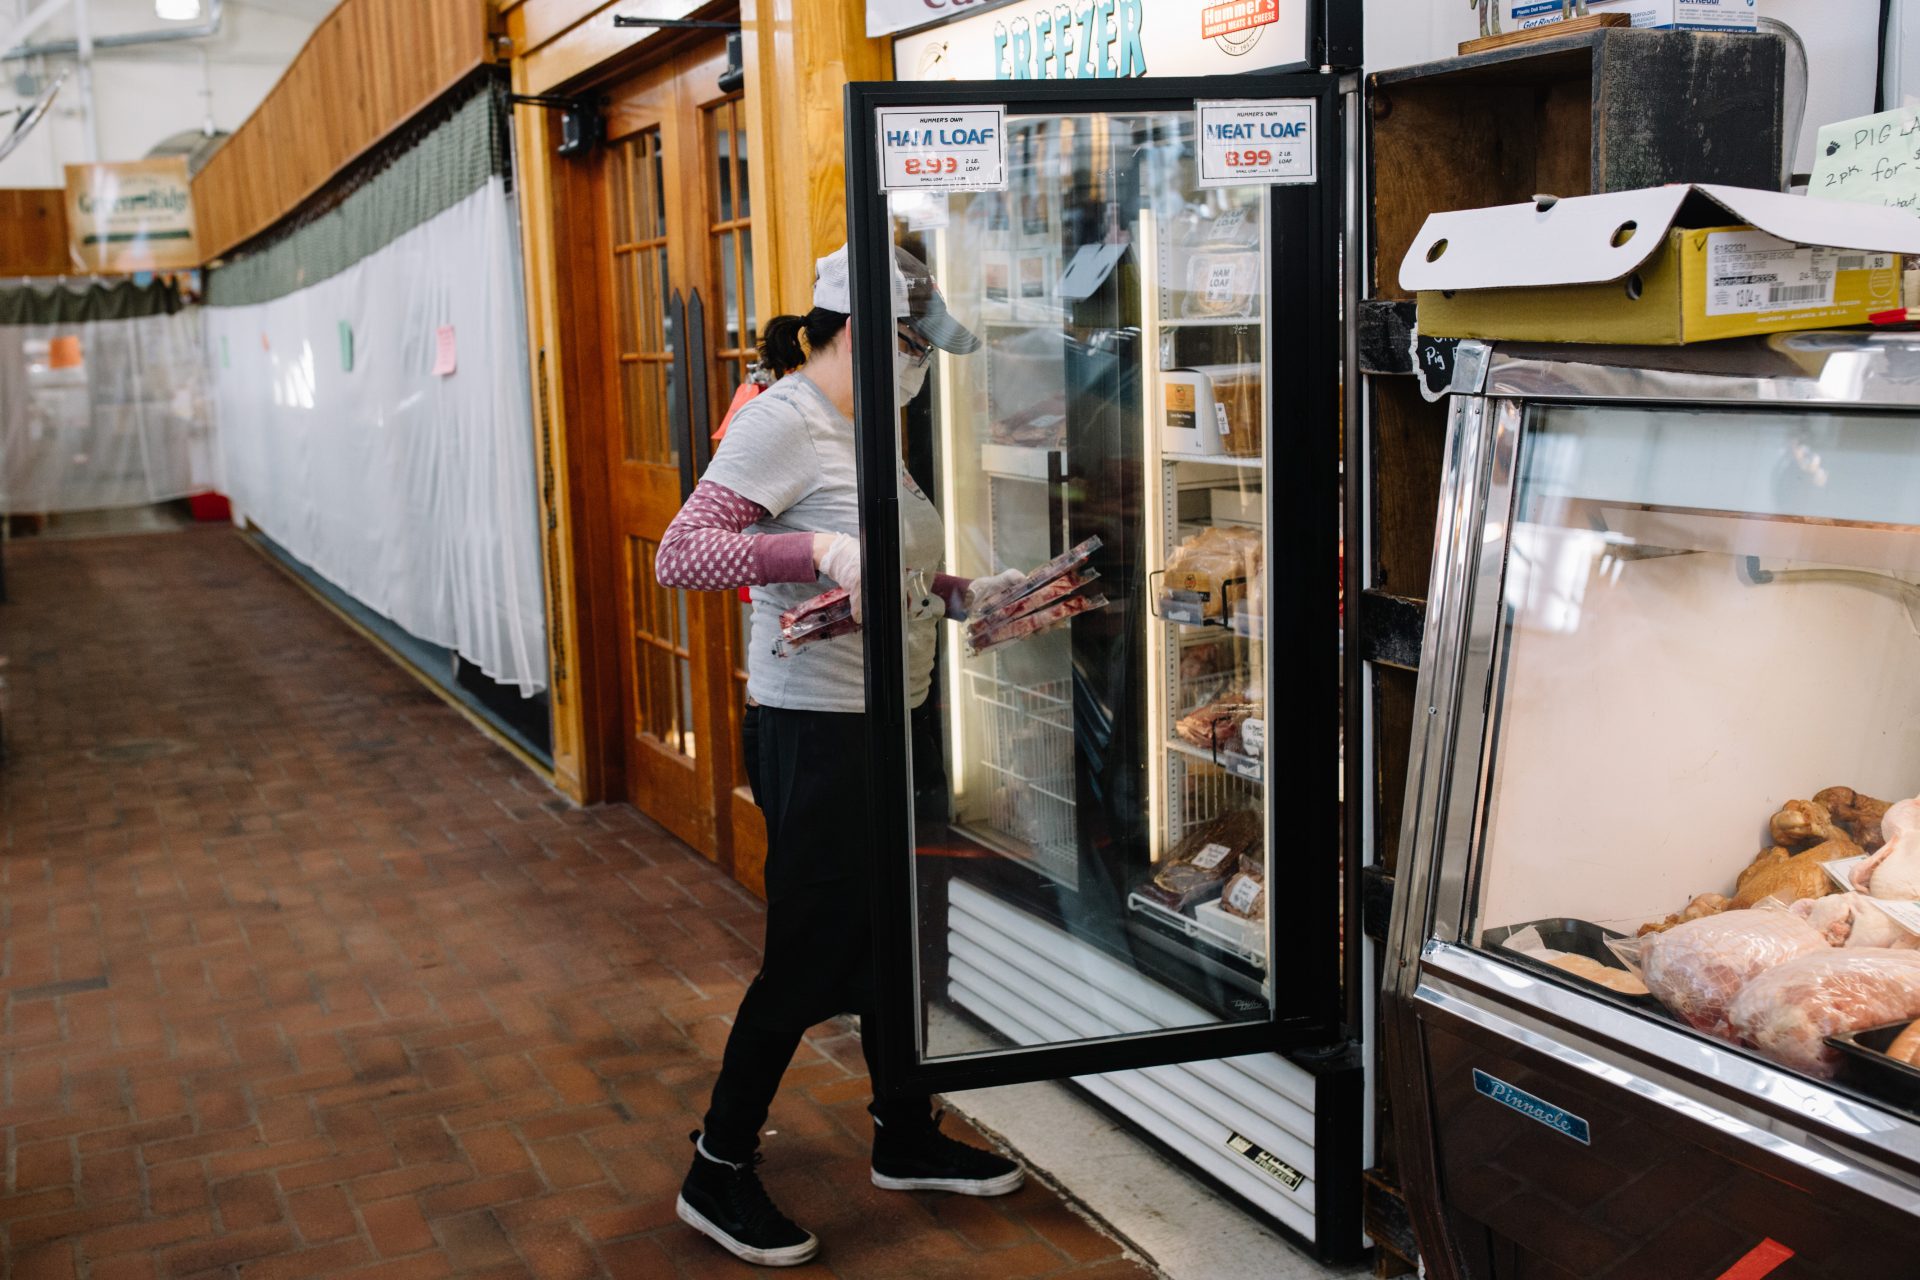 A worker wearing a mask stocks meat in a freezer at Broad Street Market in Harrisburg on April 10, 2020. The market is much quieter since the coronavirus pandemic effectively shut down the region.